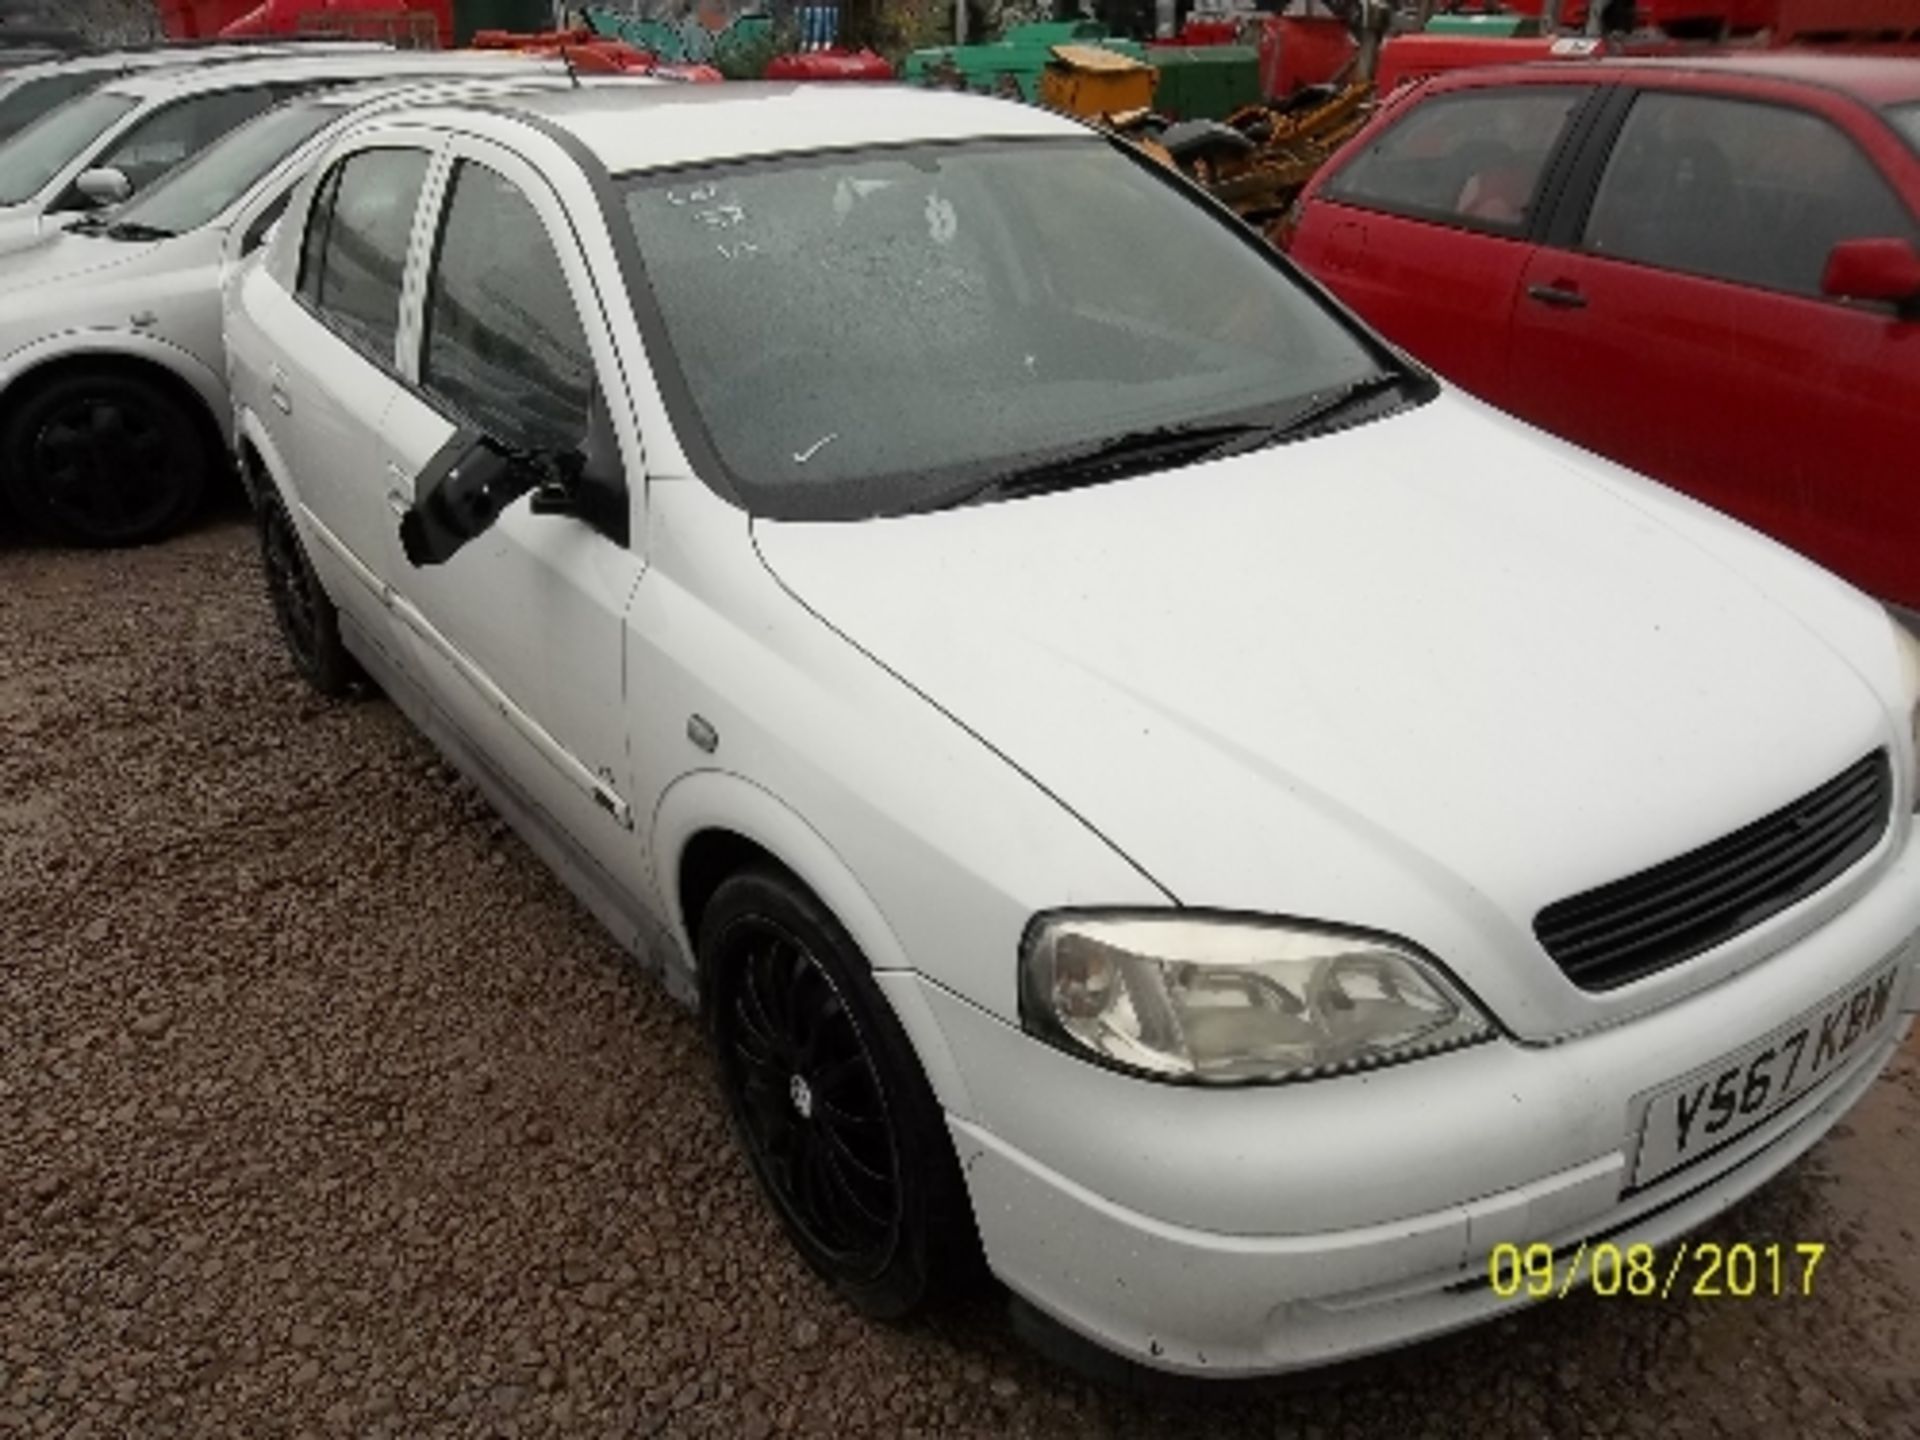 Vauxhall Astra LS DTI 16V ECO - Y567 KBW Date of registration: 19.07.2001 1686cc, diesel, manual, - Image 2 of 4